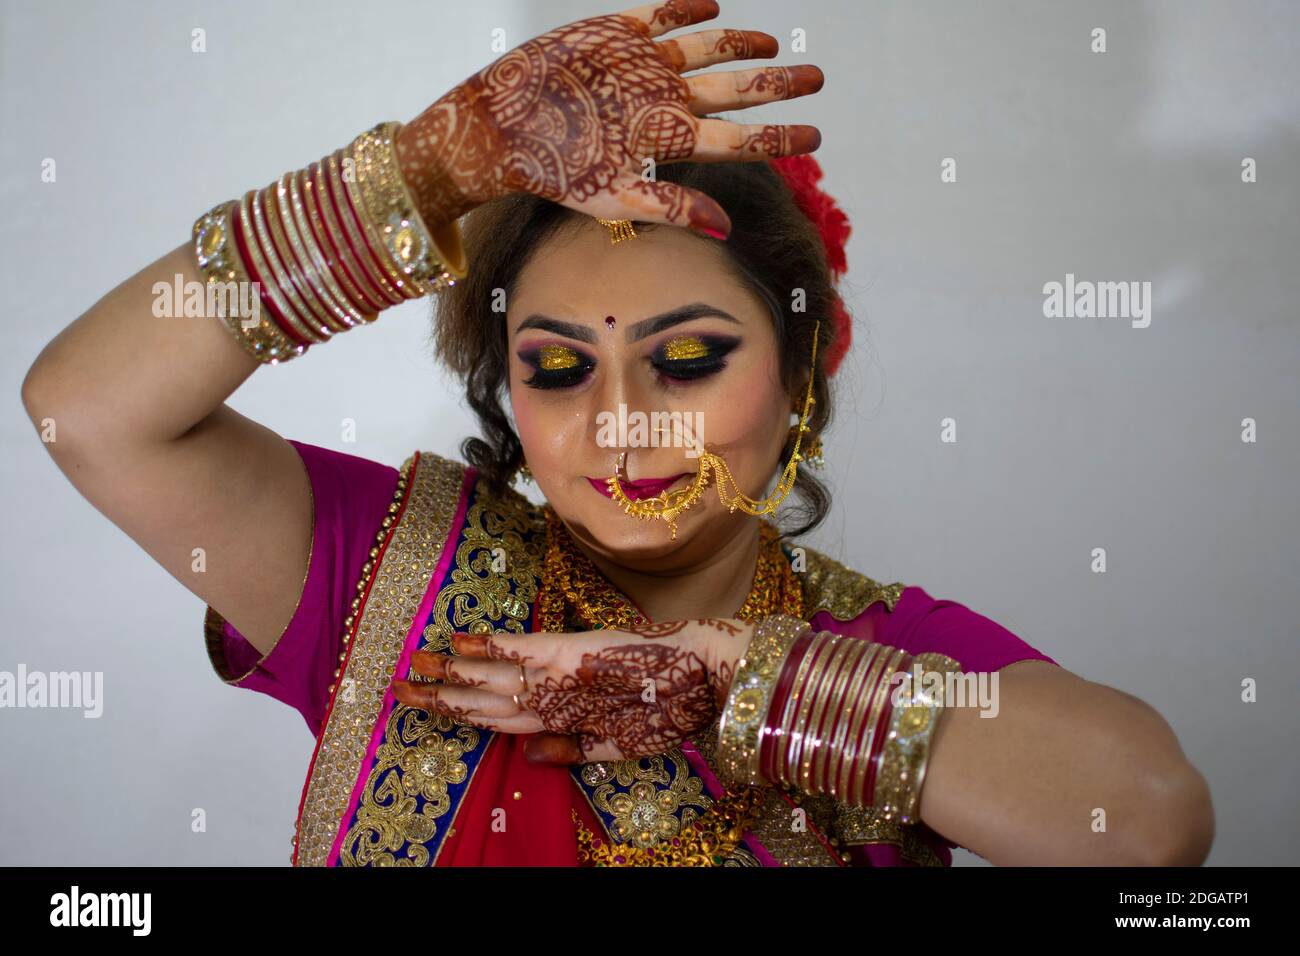 a beautiful indian girl in bridal dress wearing red saree and gold ornaments showing tattoo called mehindi 2DGATP1